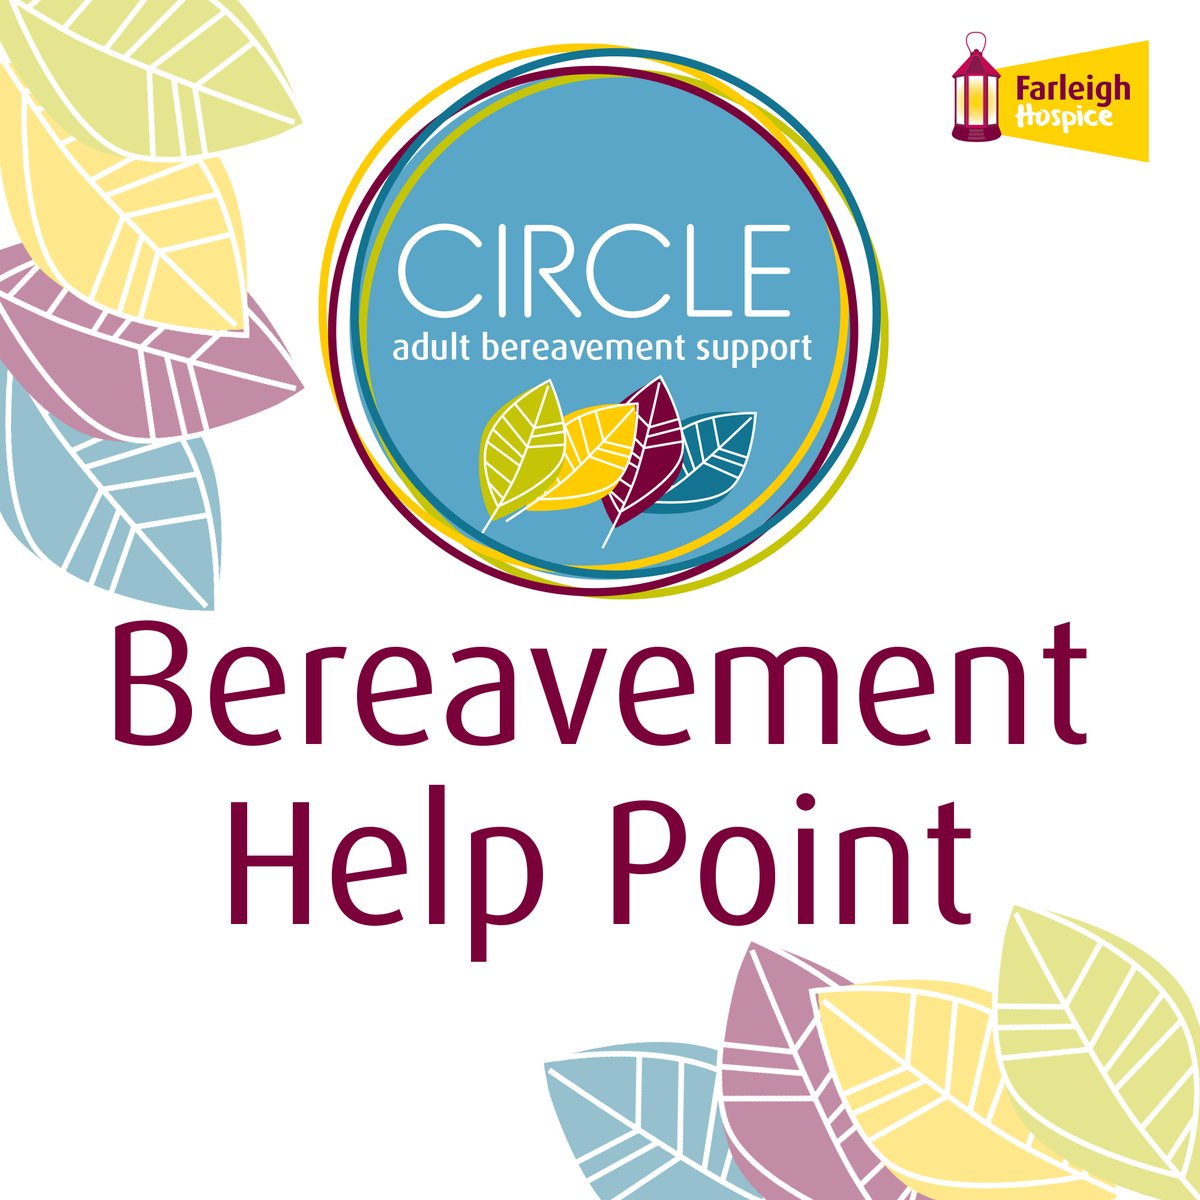 Our Chelmsford Bereavement Help Point is returning Tuesday 14 June to the same venue, but under a different name called 'Strongs'❗ 🕥 10.30am to 12pm 📍 74 Springfield Road, Chelmsford, CM2 6JY For more info, visit farleighhospice.org/advice-support… 🤍